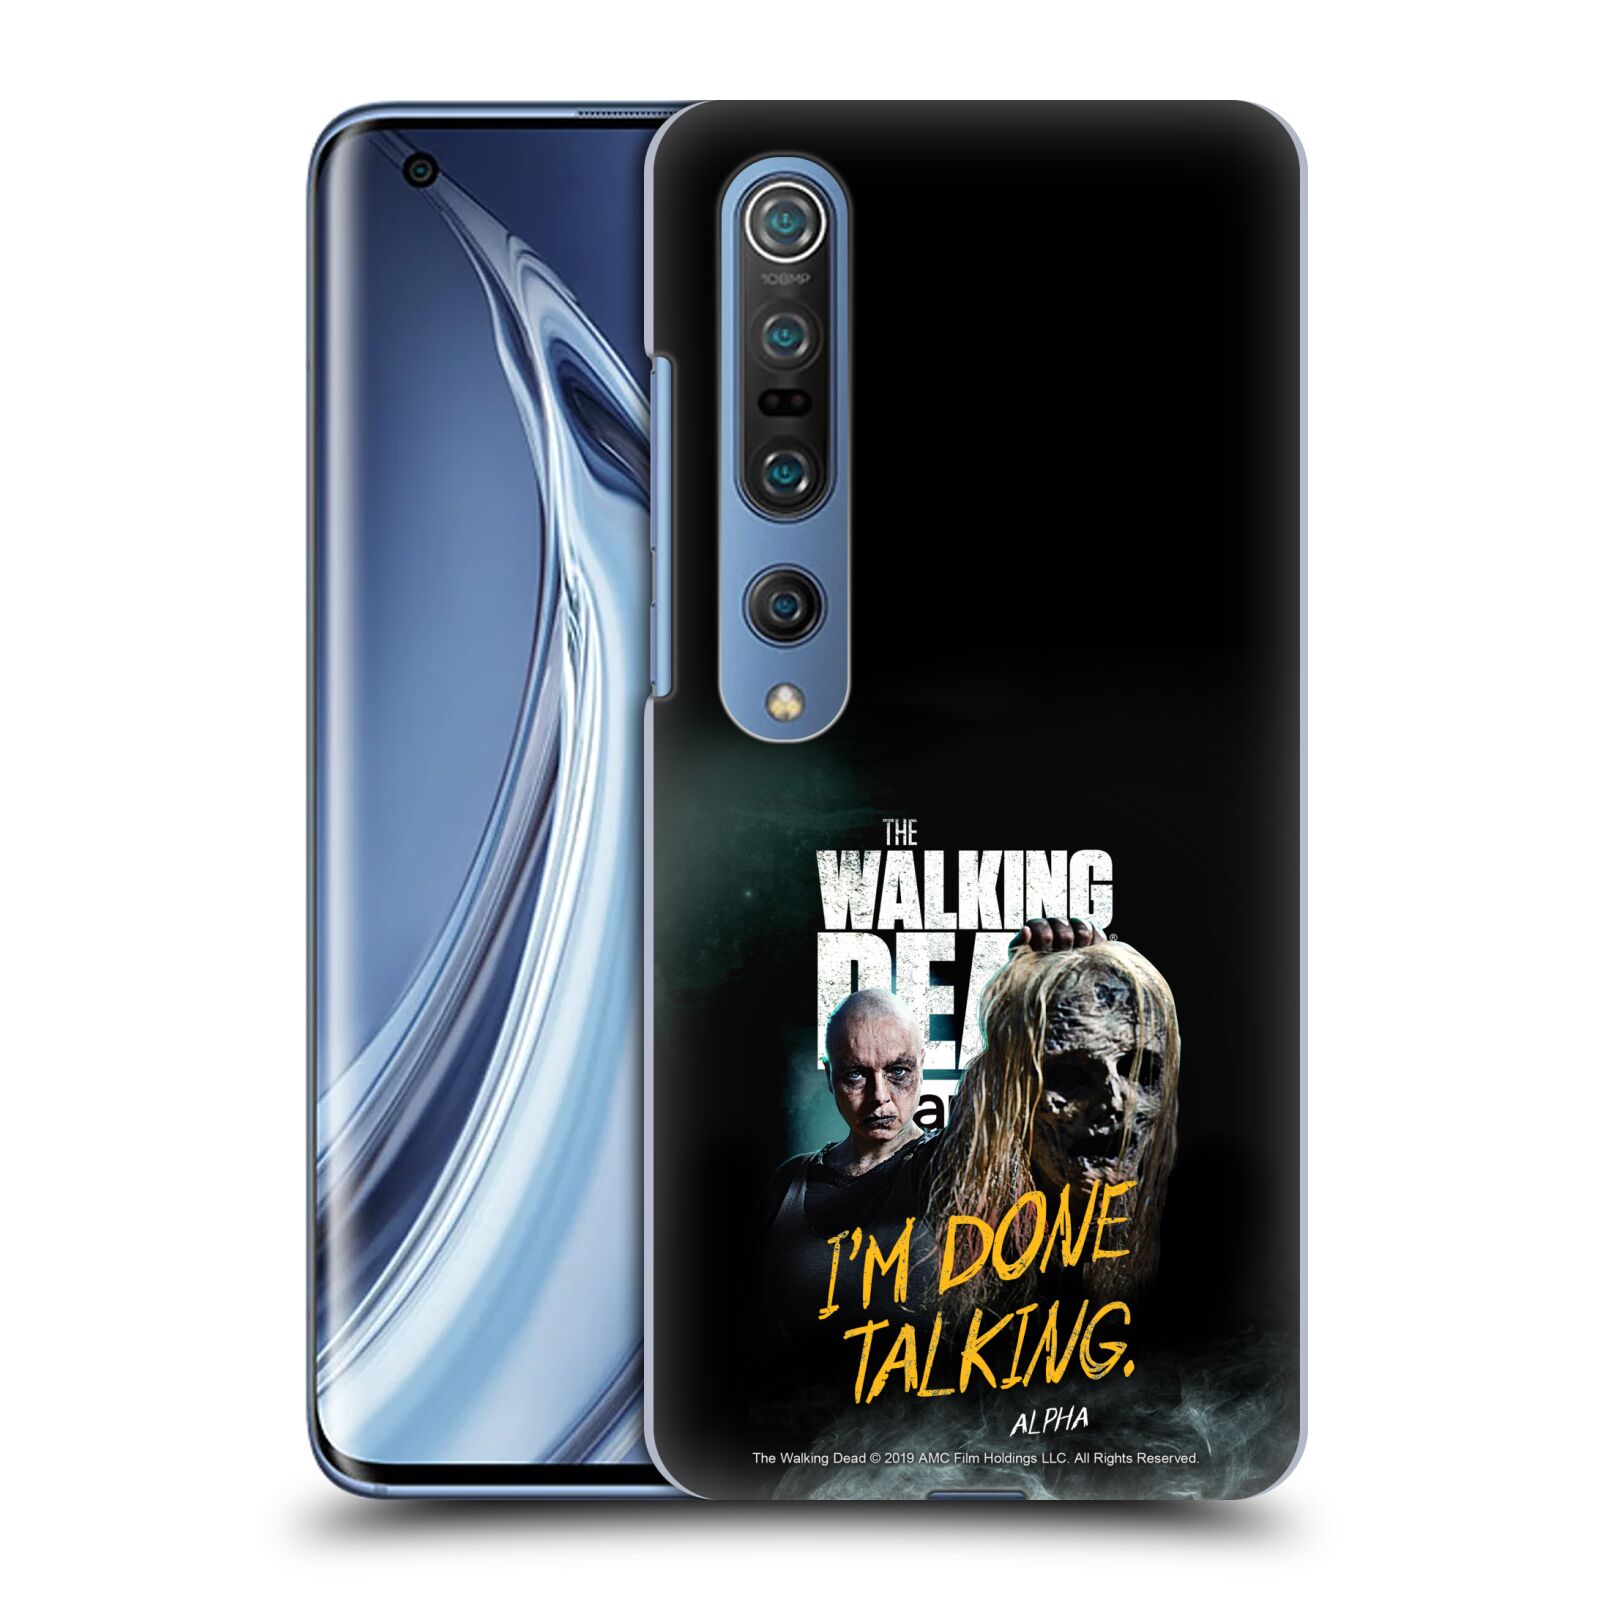 OFFICIAL AMC THE WALKING DEAD SEASON 9 QUOTES BACK CASE FOR XIAOMI PHONES